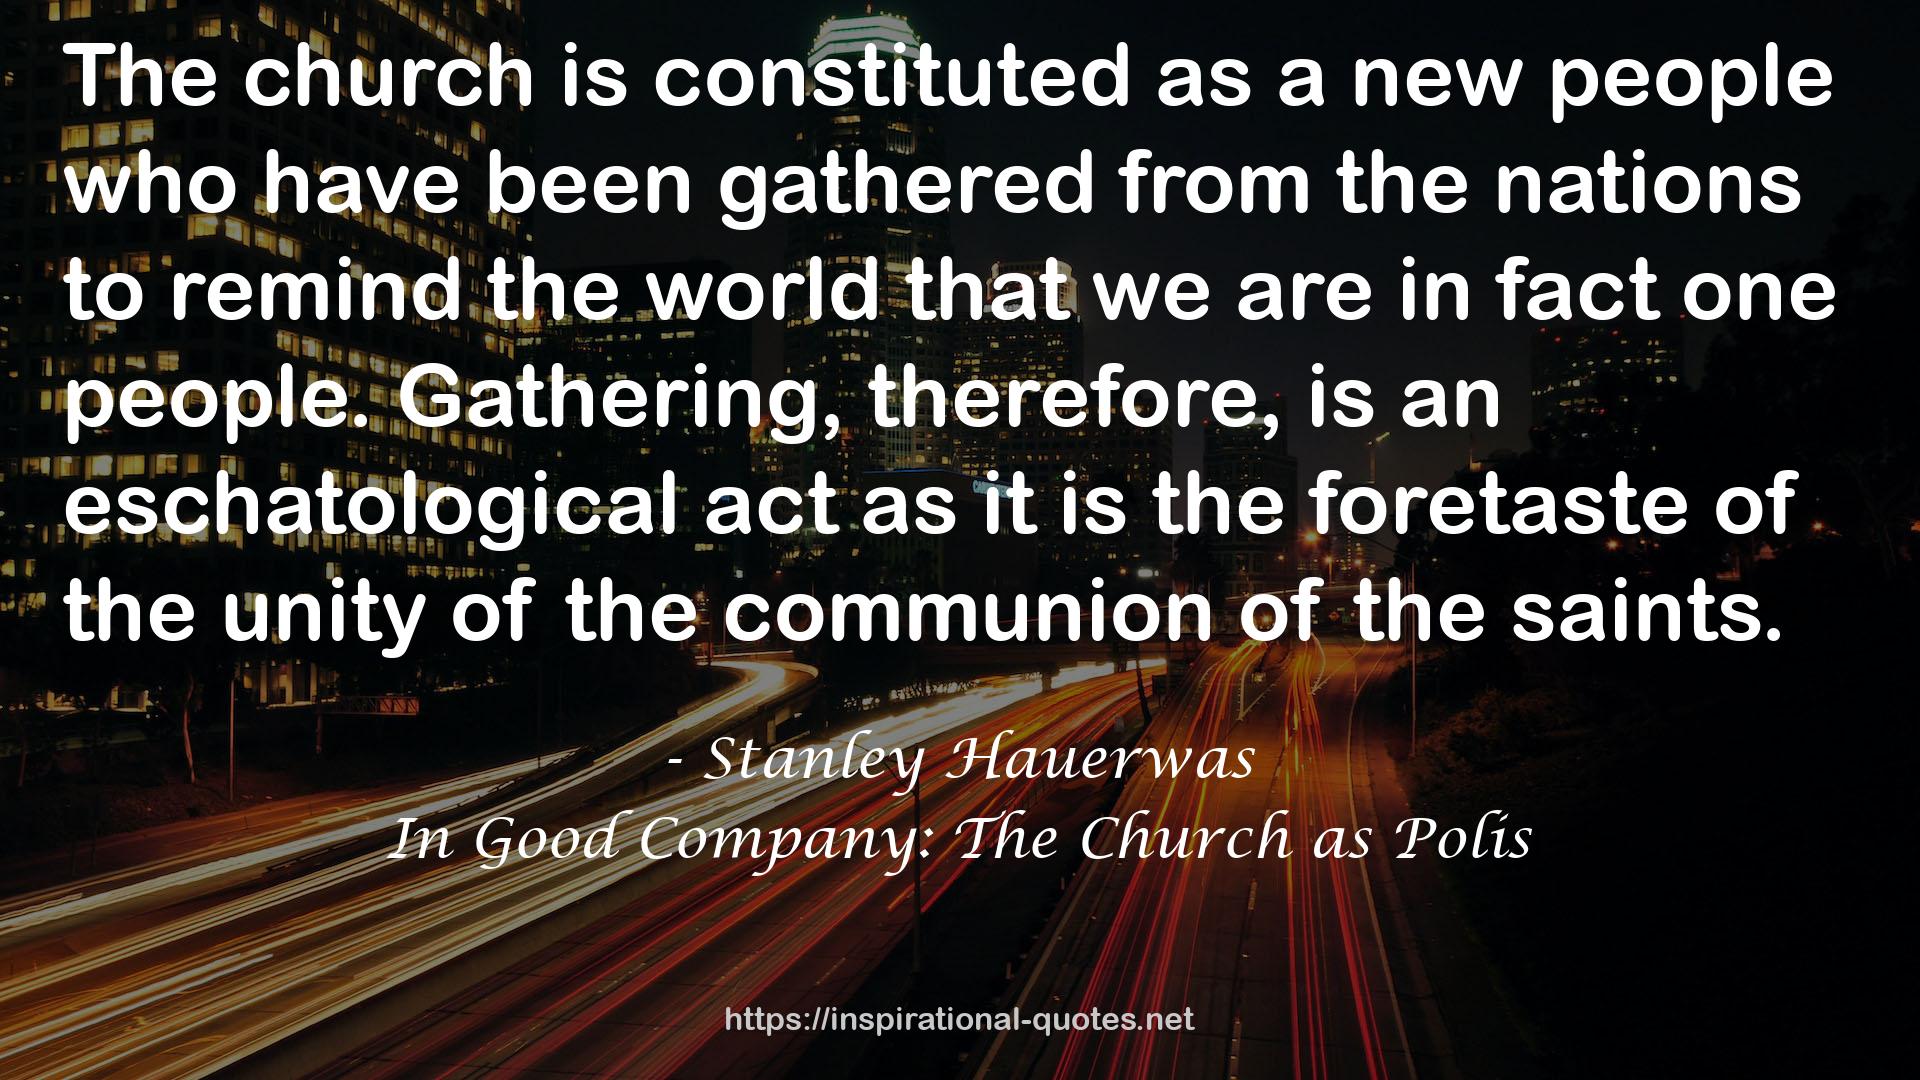 In Good Company: The Church as Polis QUOTES